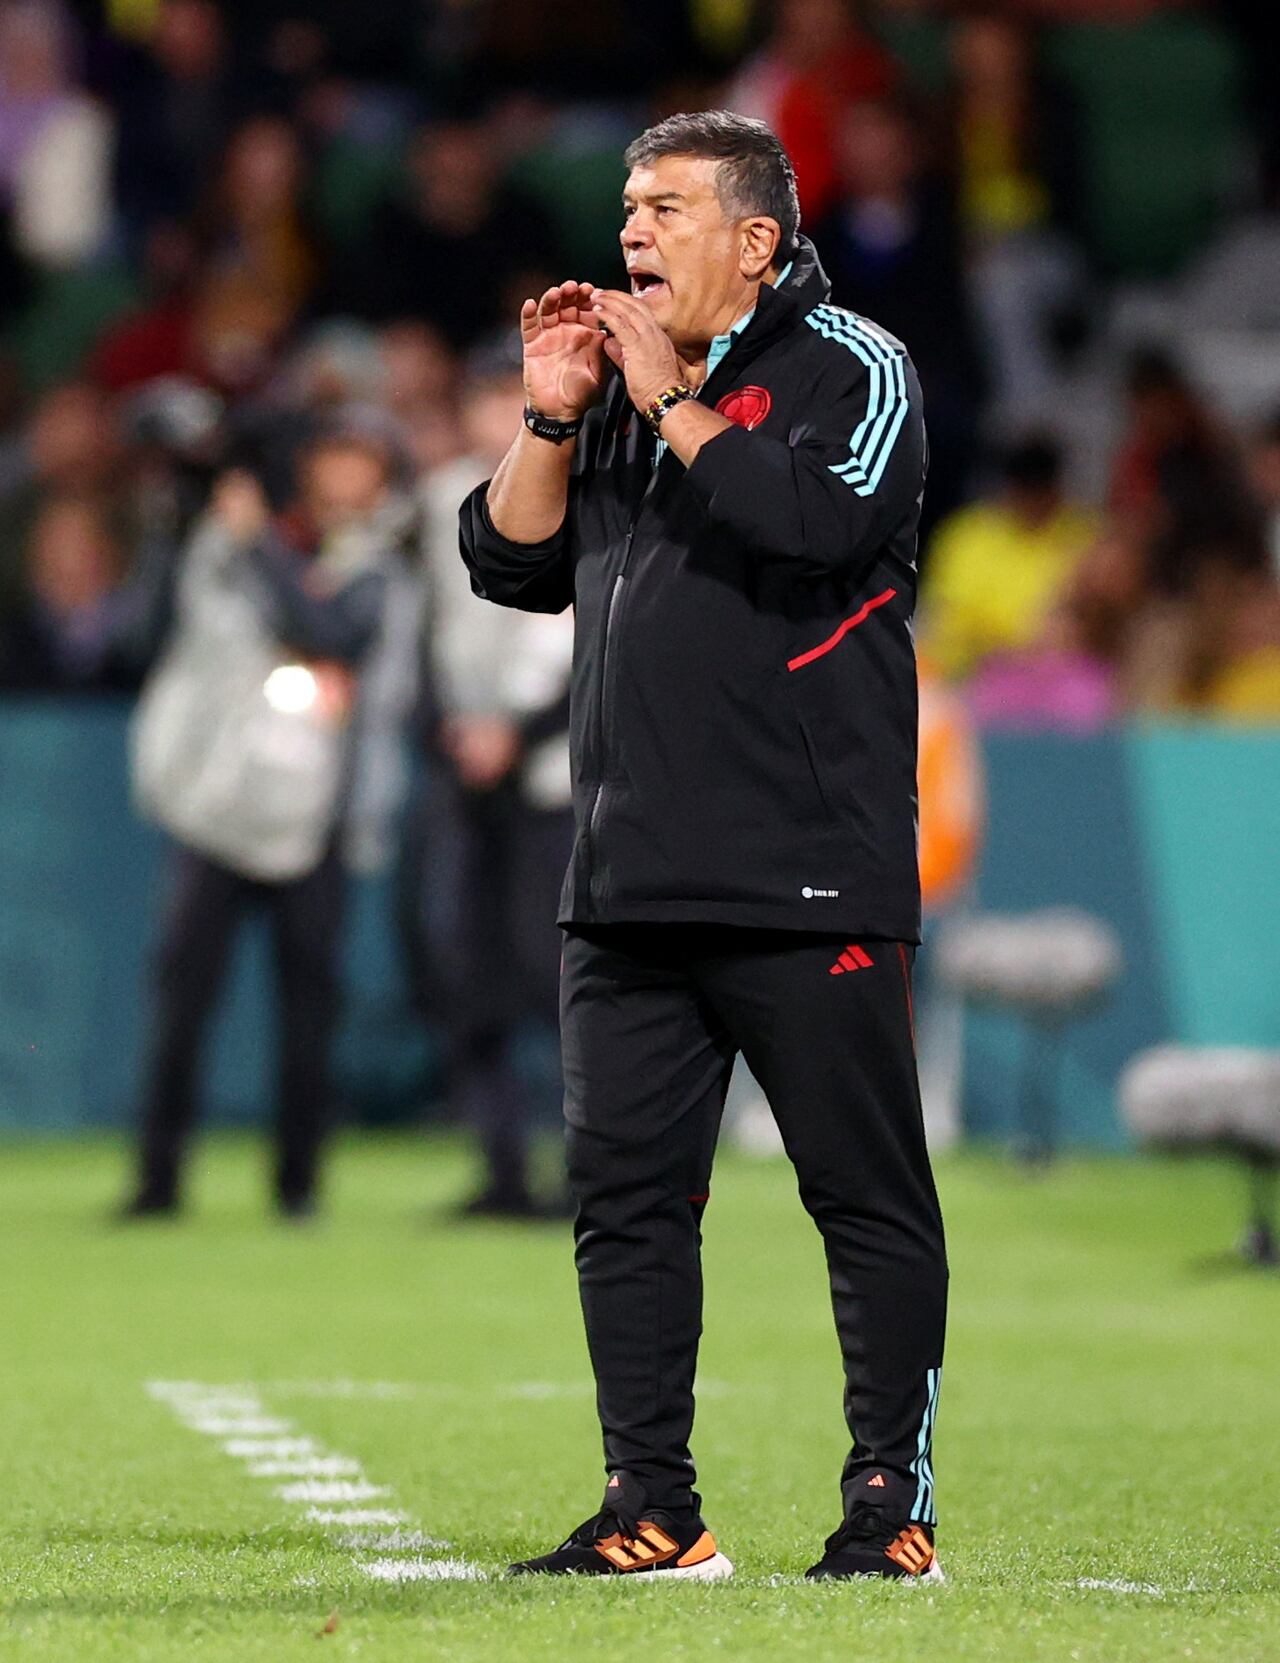 Soccer Football - FIFA Women’s World Cup Australia and New Zealand 2023 - Group H - Morocco v Colombia - Perth Rectangular Stadium, Perth, Australia - August 3, 2023 Colombia coach Nelson Abadia reacts REUTERS/Luisa Gonzalez